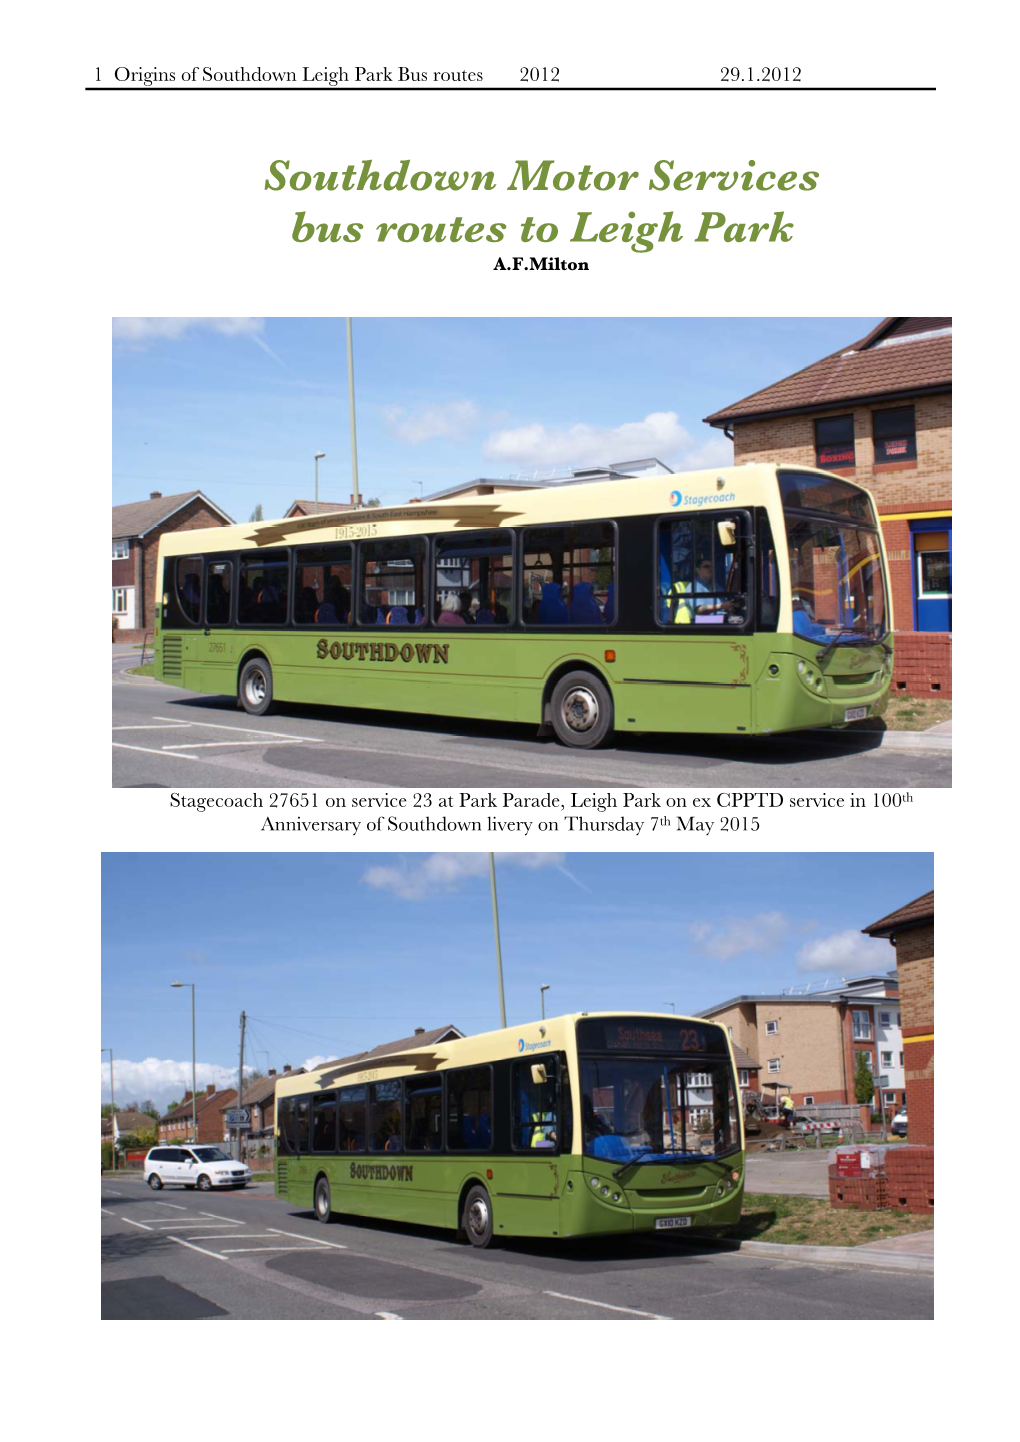 Southdown Motor Services Bus Routes to Leigh Park